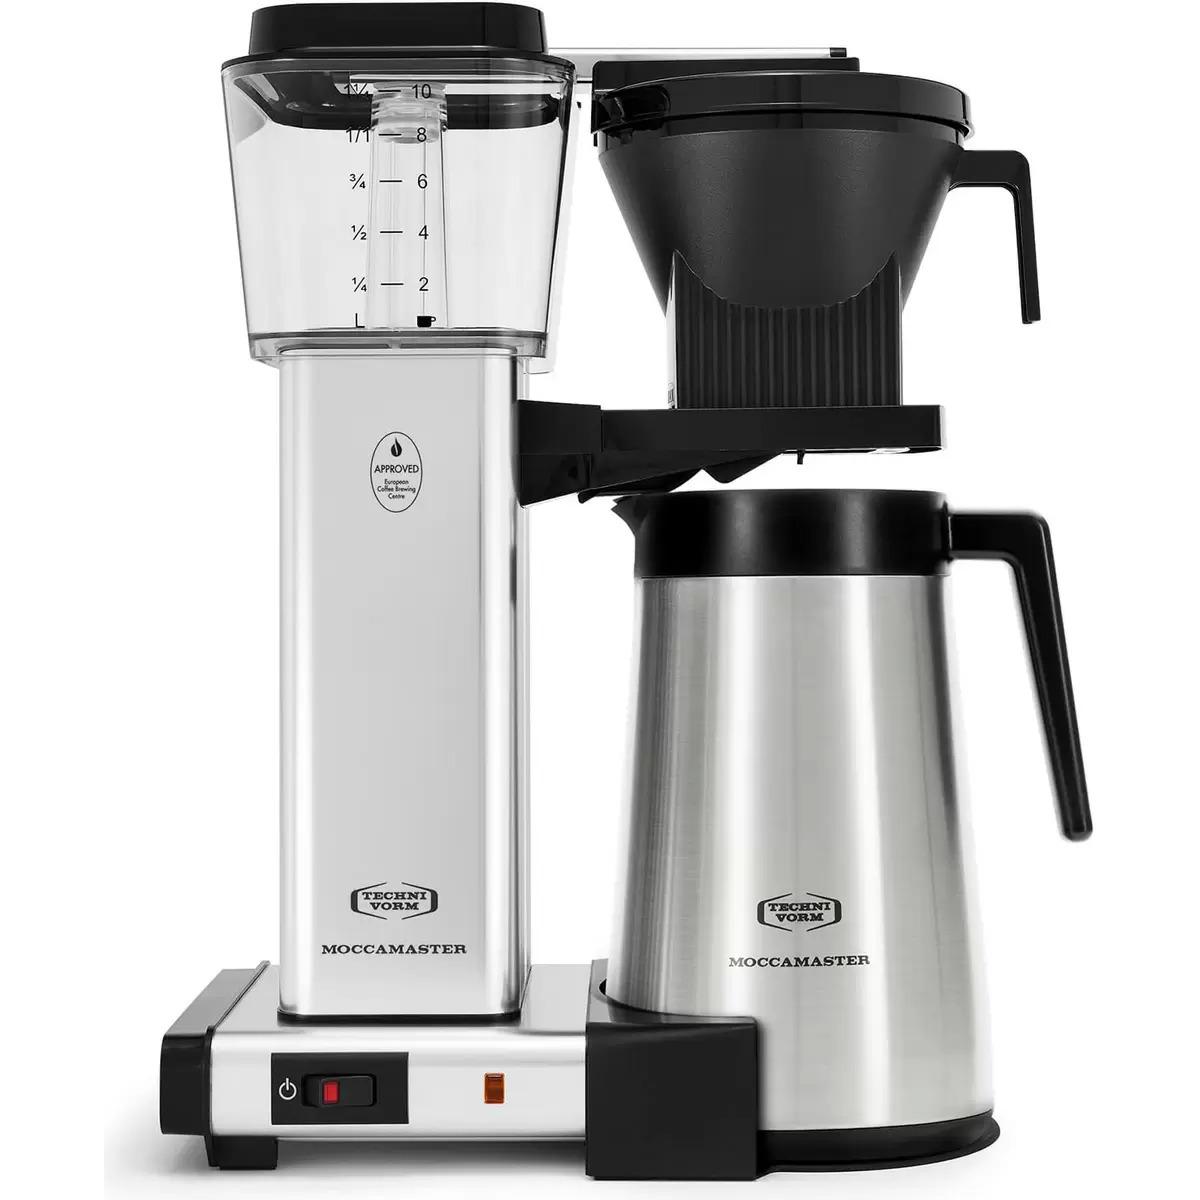 Technivorm Moccamaster 79312 KBGT Coffee Brewer for $219.99 Shipped